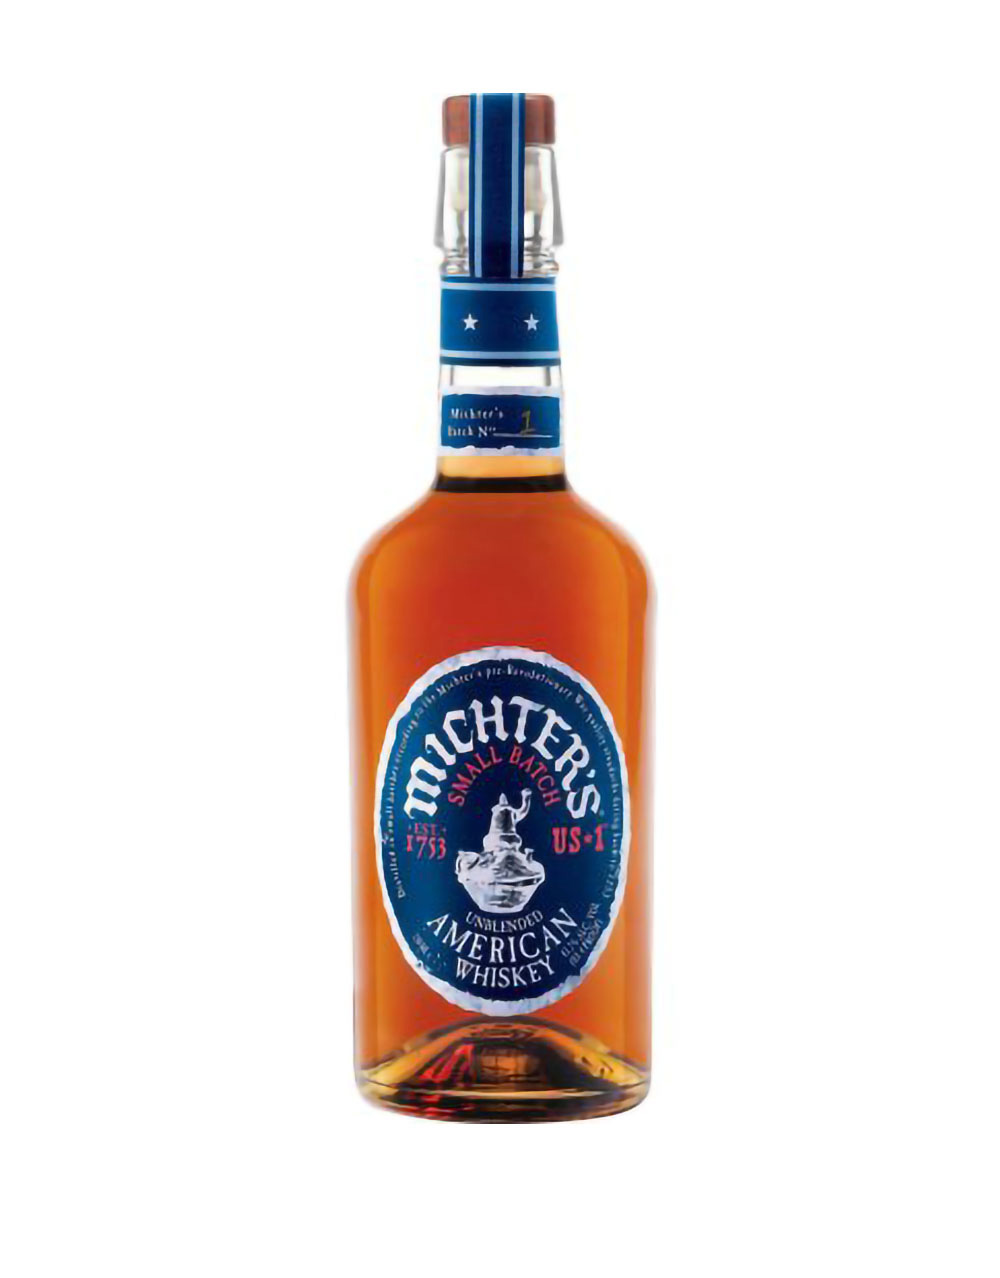 Michter's US*1 Unblended Small Batch American Whiskey